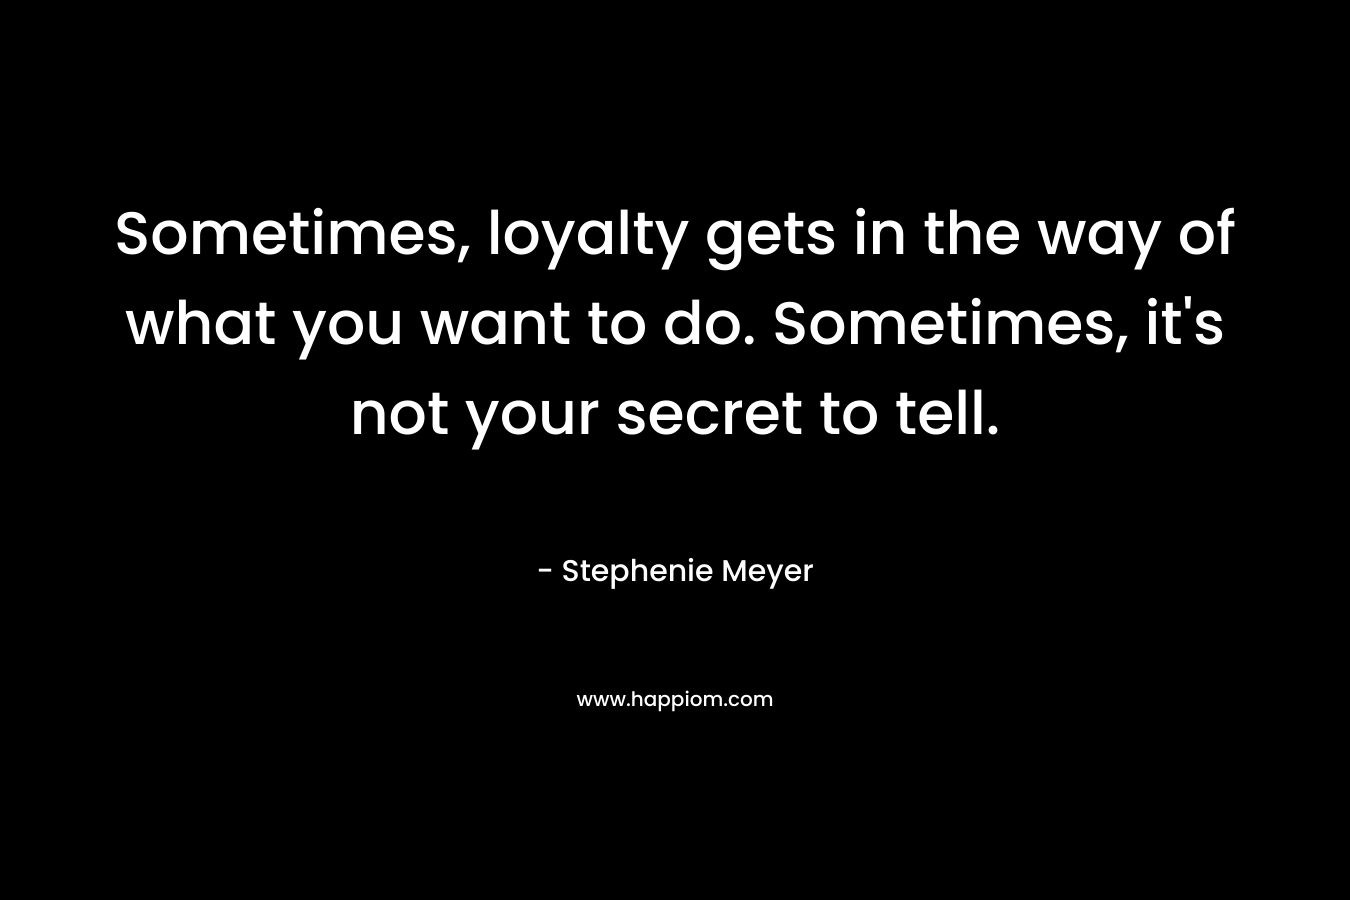 Sometimes, loyalty gets in the way of what you want to do. Sometimes, it’s not your secret to tell. – Stephenie Meyer